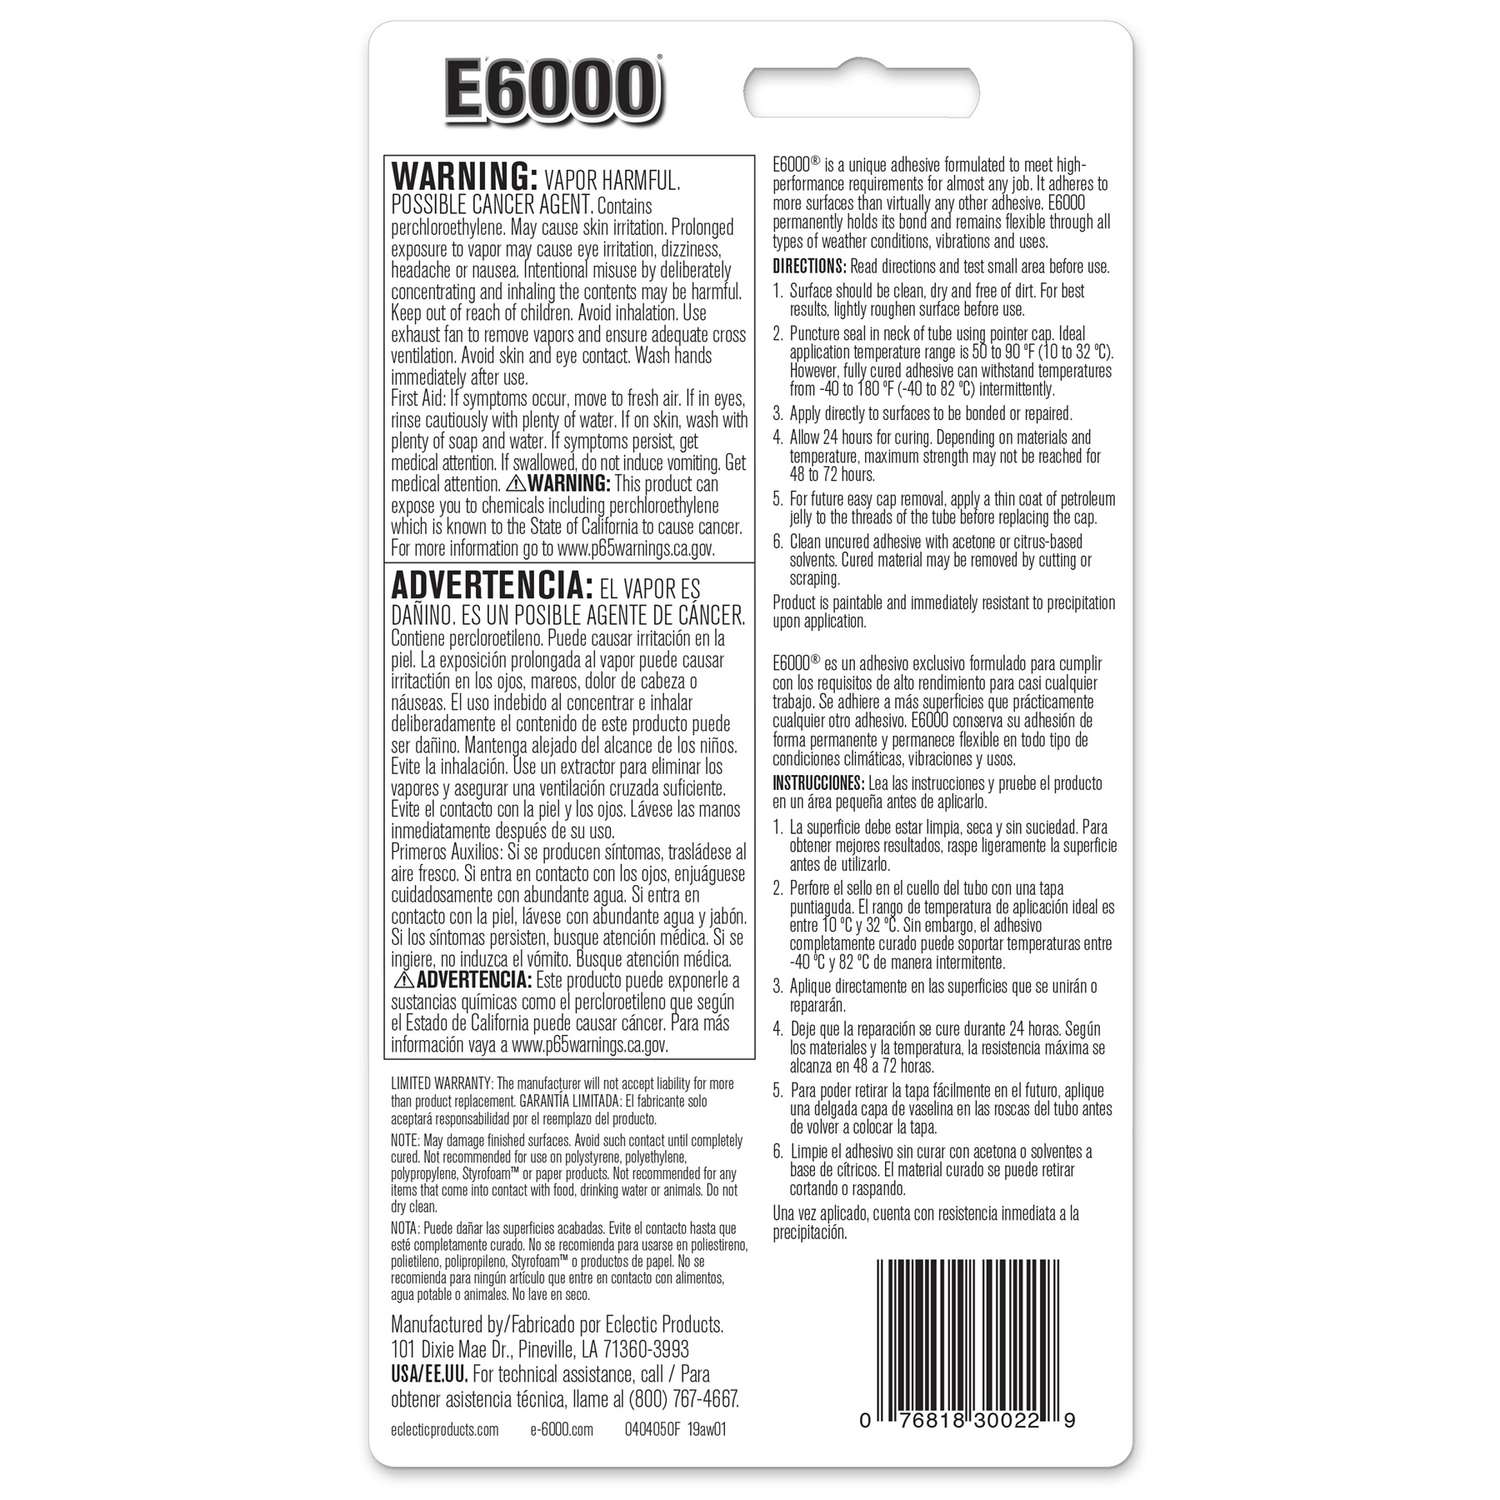 7 THINGS YOU NEED TO KNOW ABOUT E6000 